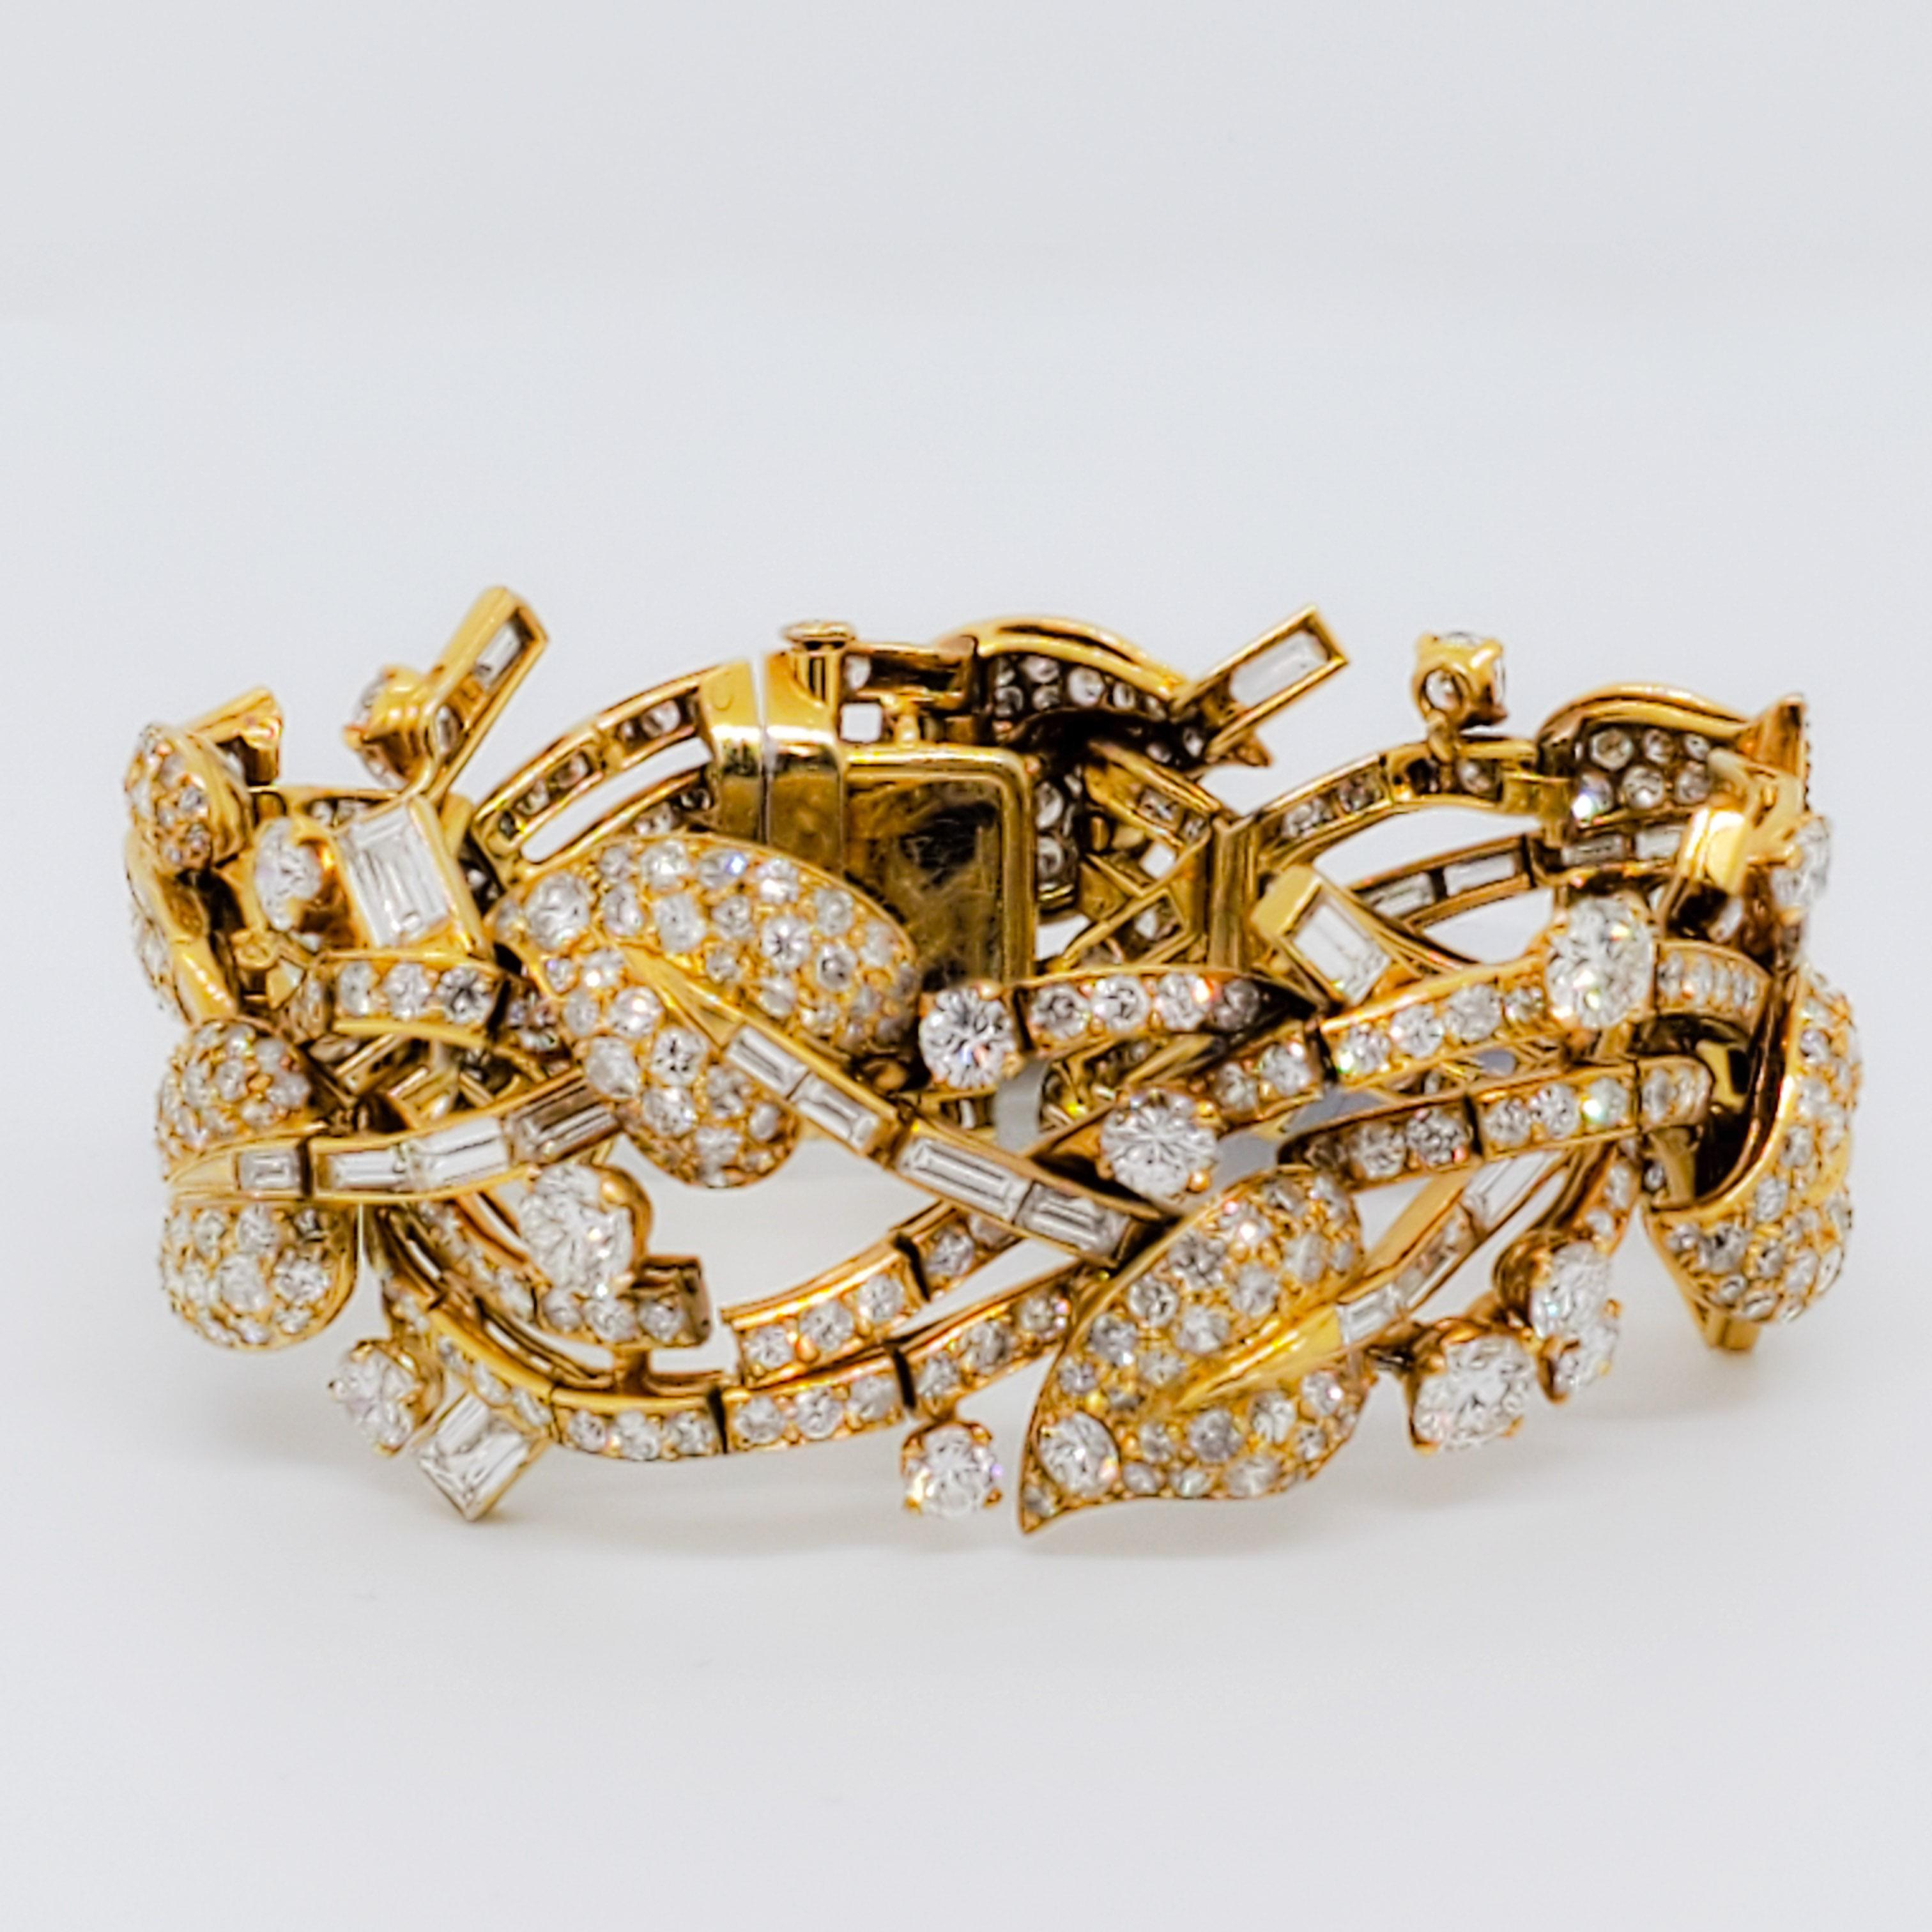 Beautiful cuff bracelet featuring 18.00 ct. of good quality, white, and bright diamond rounds and baguettes. Delicately handmade in 18k yellow gold.